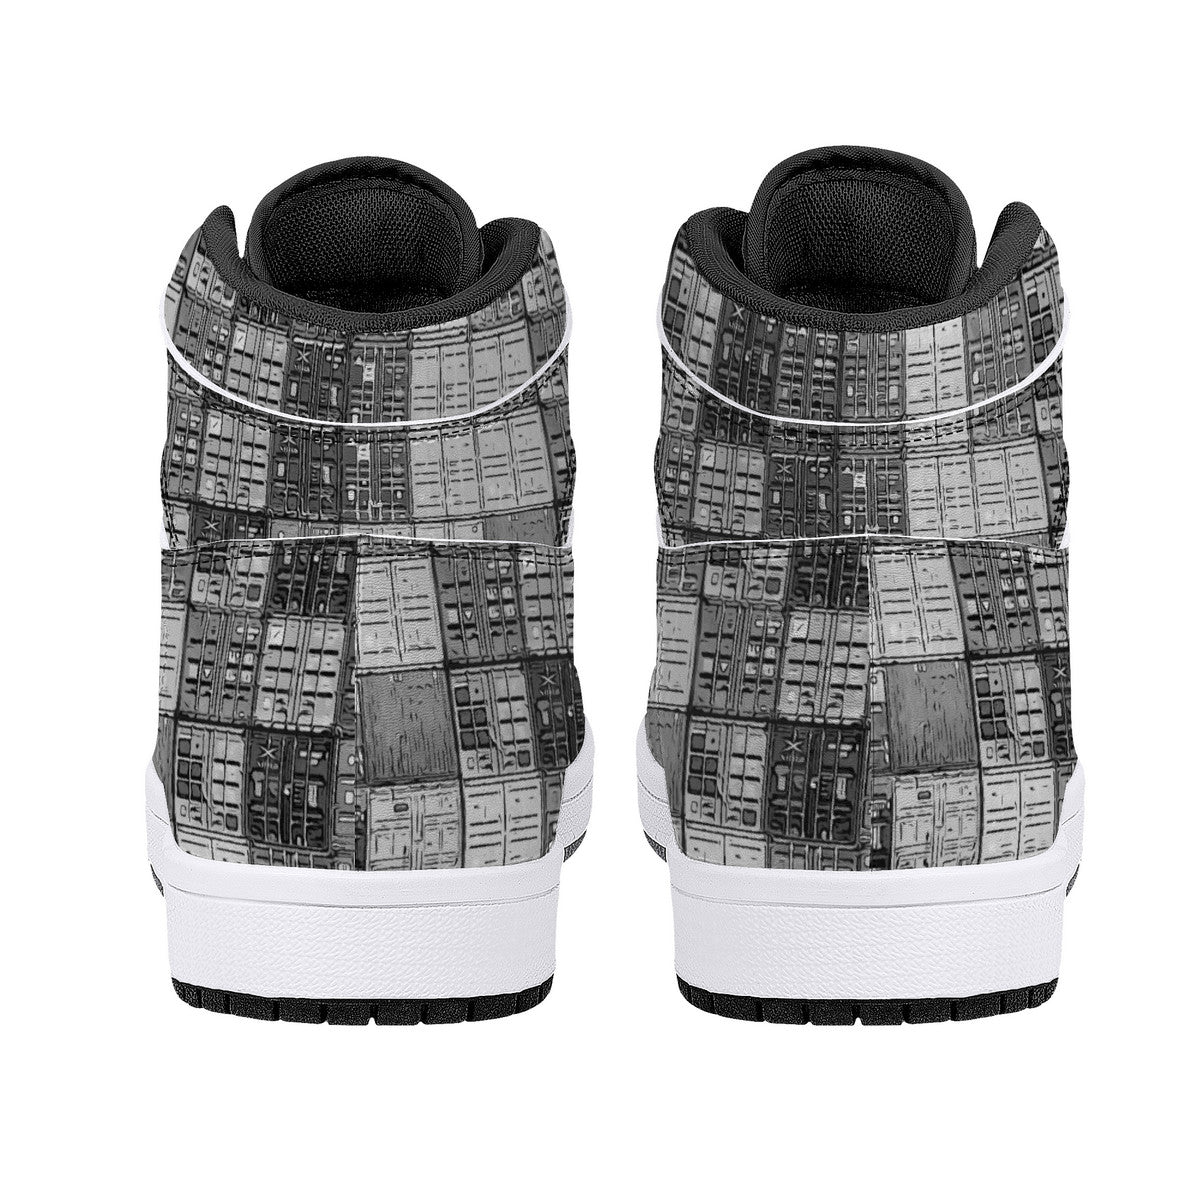 "Mono Shipping Containers" High-Top Synthetic Leather Sneakers